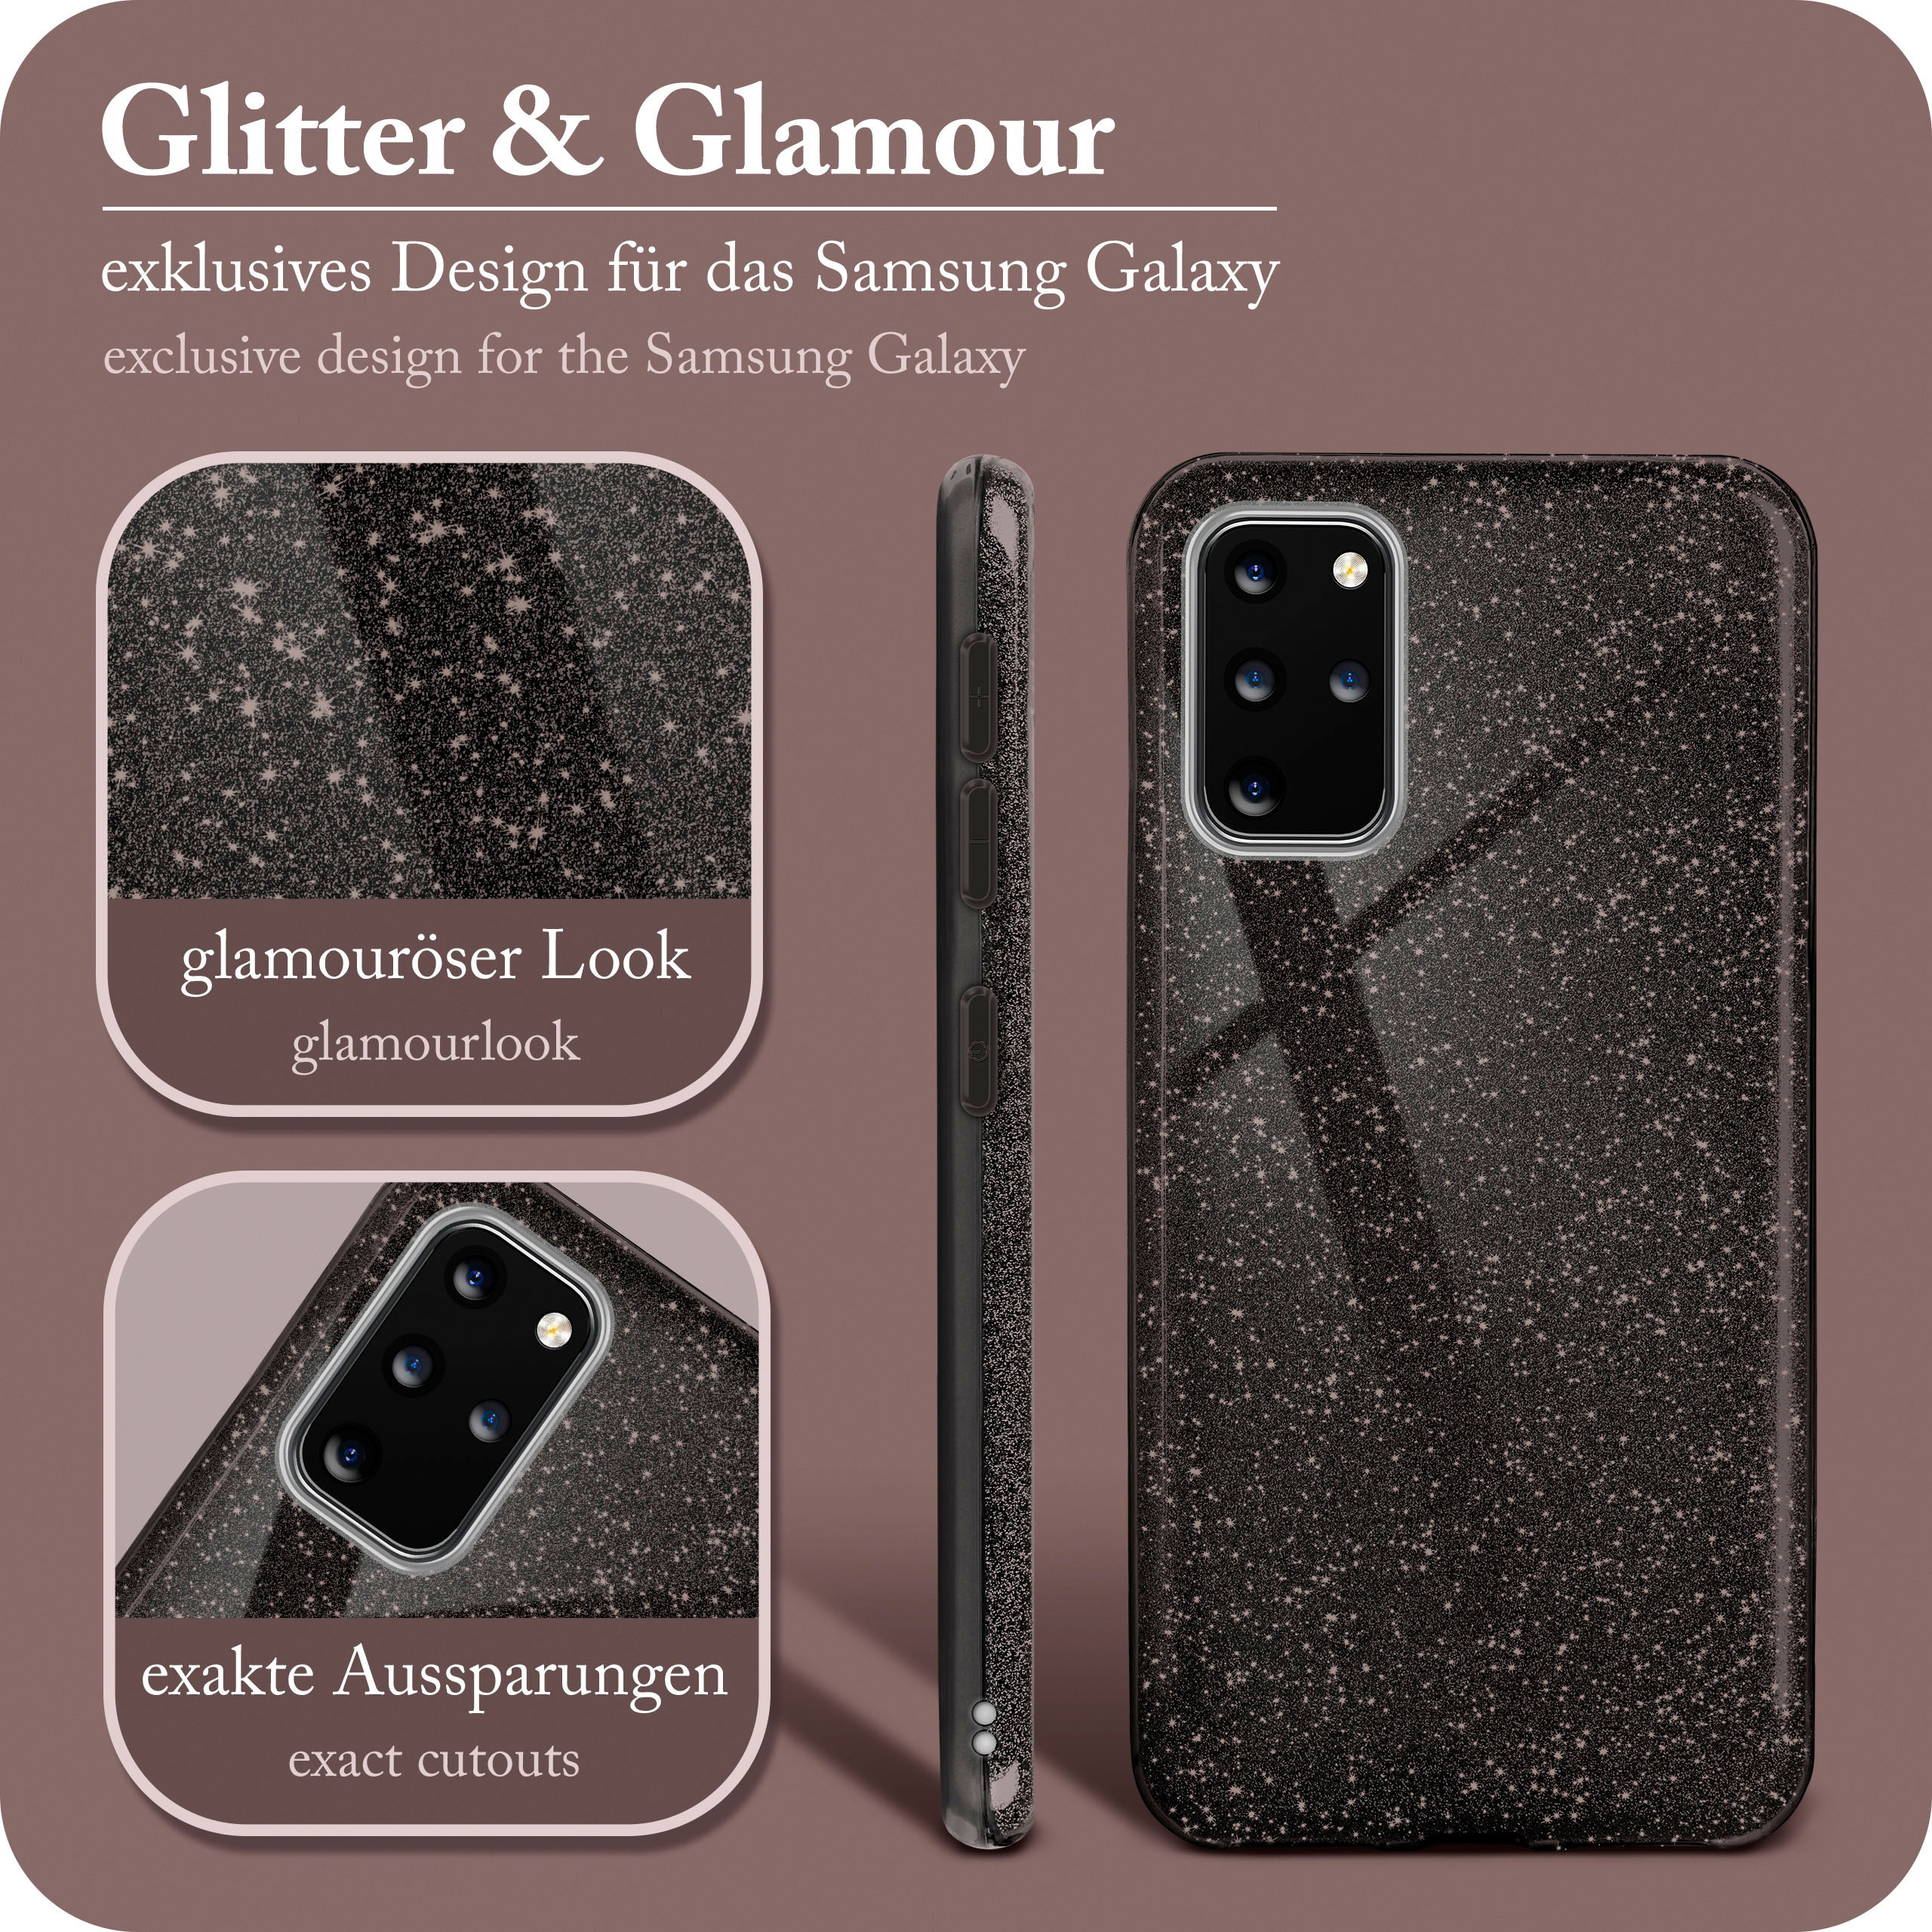 Plus Black Samsung, 5G, S20 - / Glitter Glamour Backcover, ONEFLOW Case, Galaxy